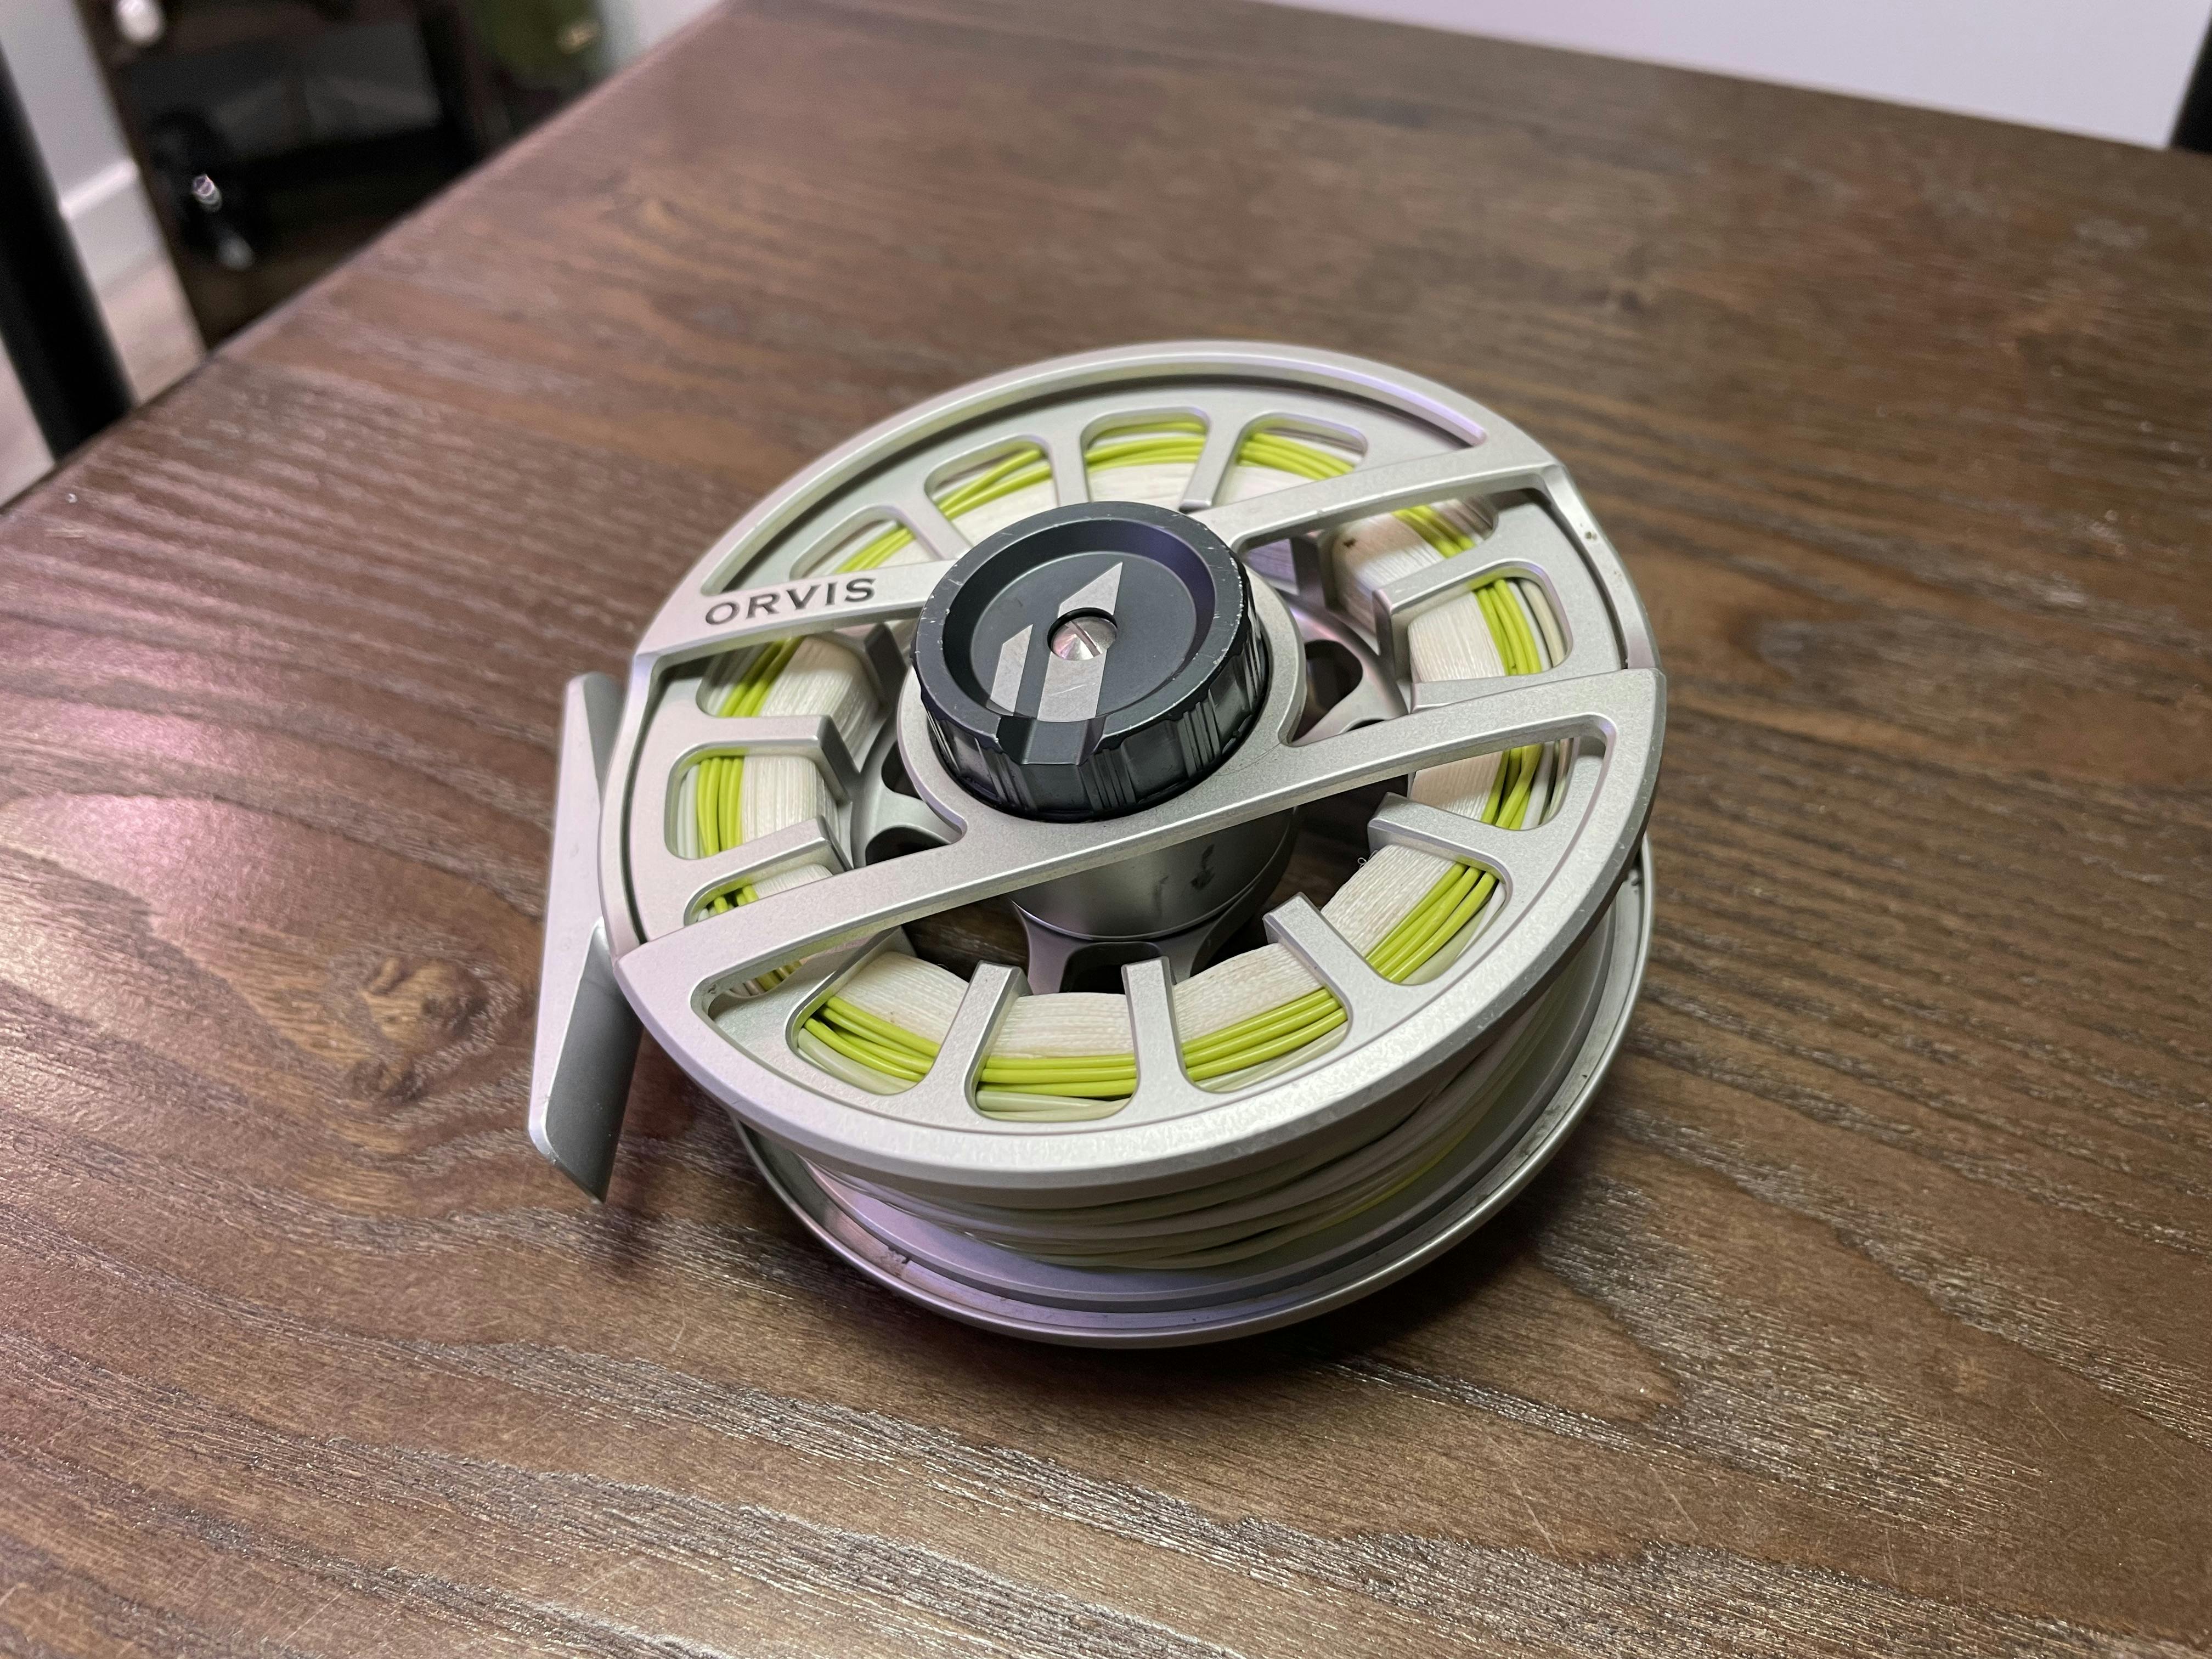 The Orvis Pro Power Taper Smooth Fly Line on a reel.